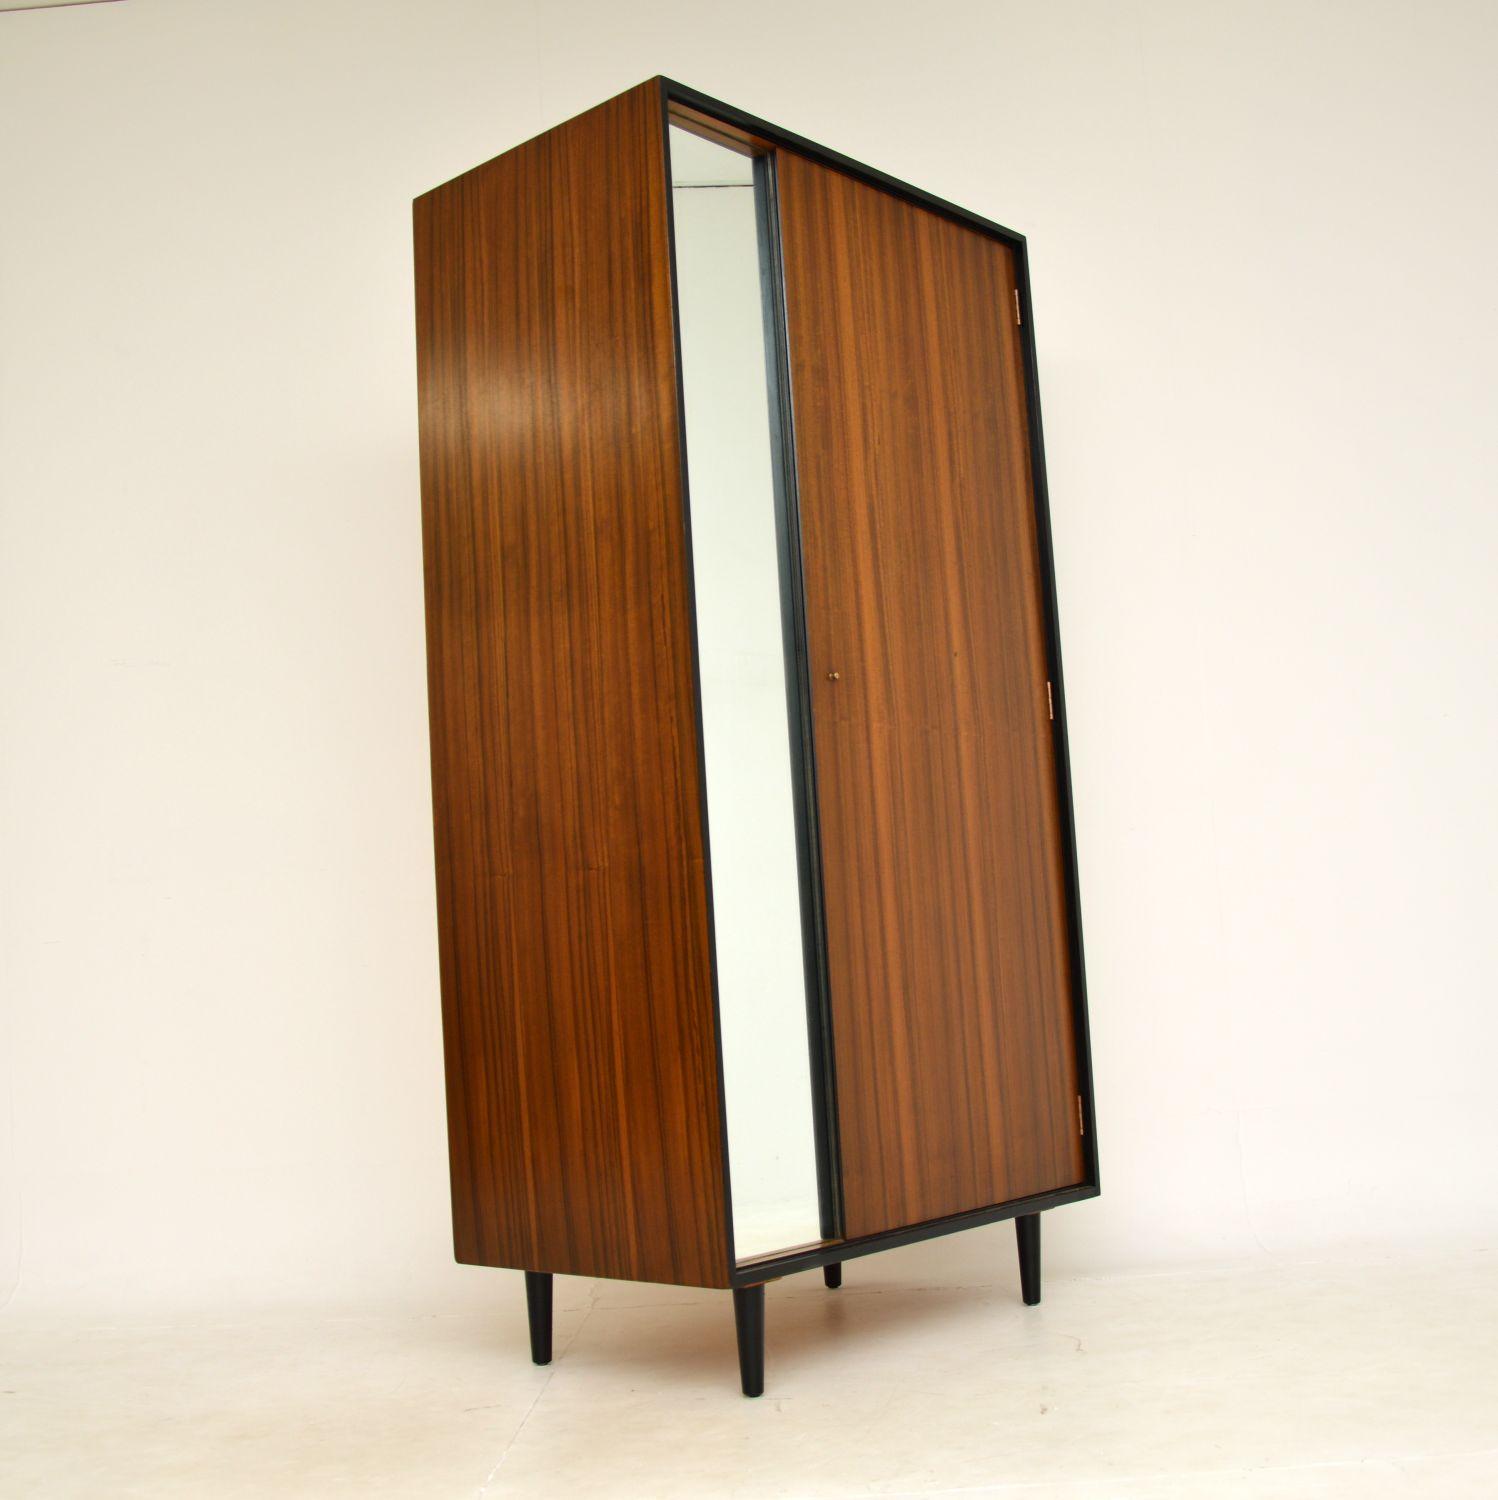 A beautifully designed and extremely well made vintage wardrobe in walnut. This was made in England, and dates from the 1950-1960s.

It was designed by John & Sylvia Reid for Stag’s C Range of furniture. The quality is superb, there is lots of